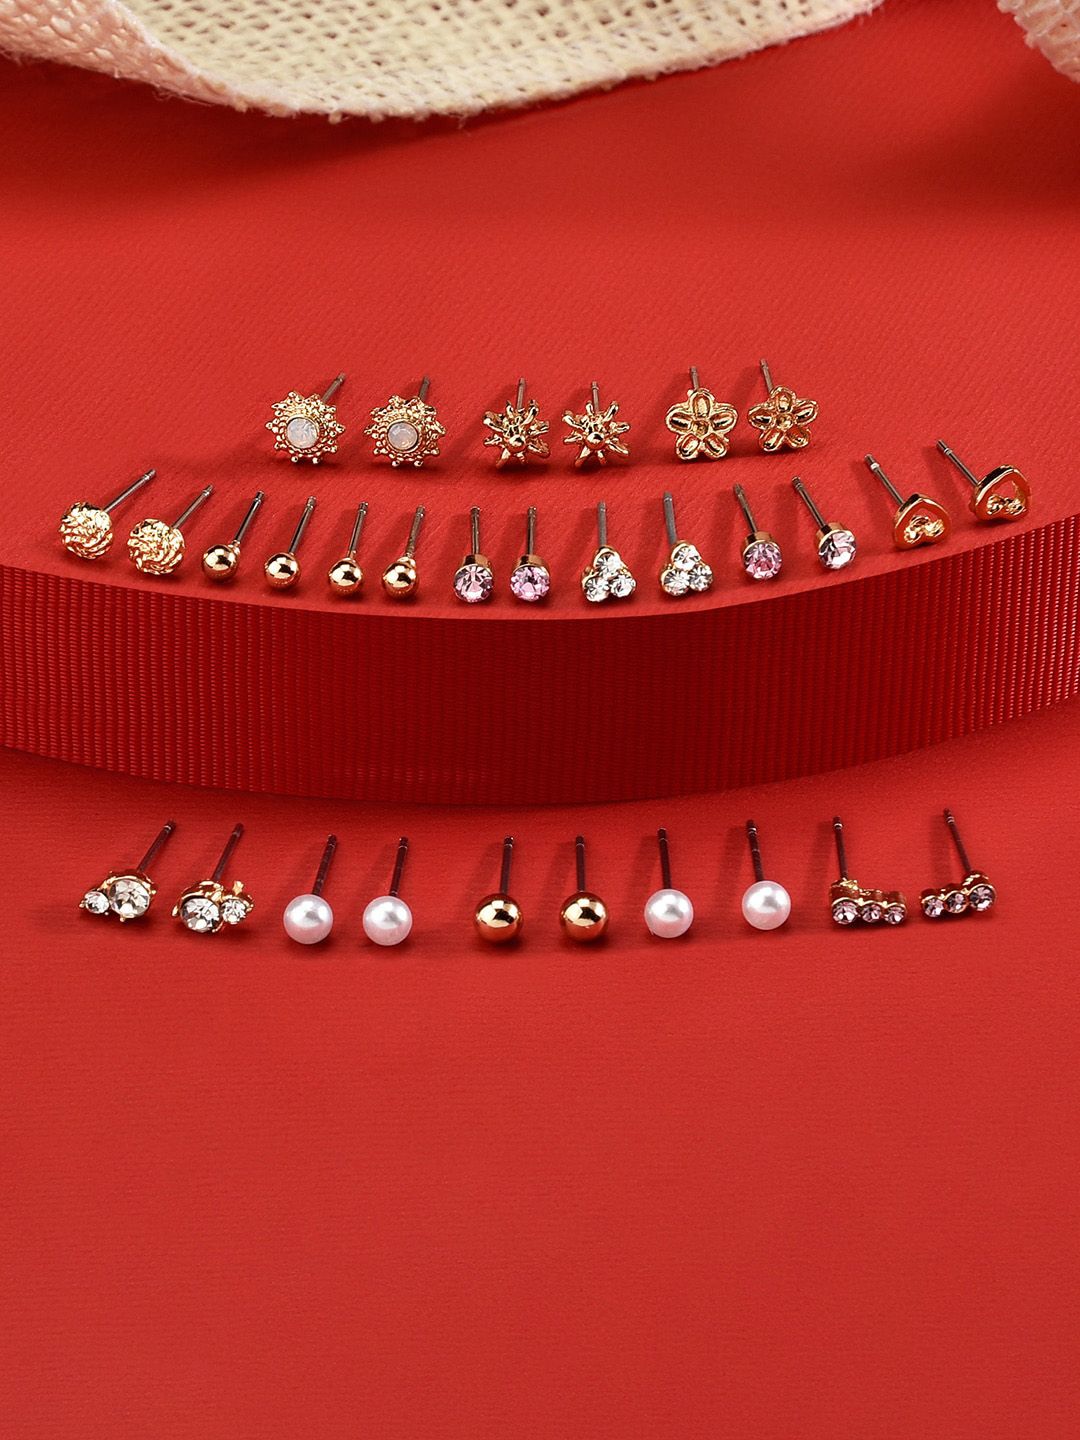 Accessorize Set Of 15 Contemporary Studs Earrings Price in India